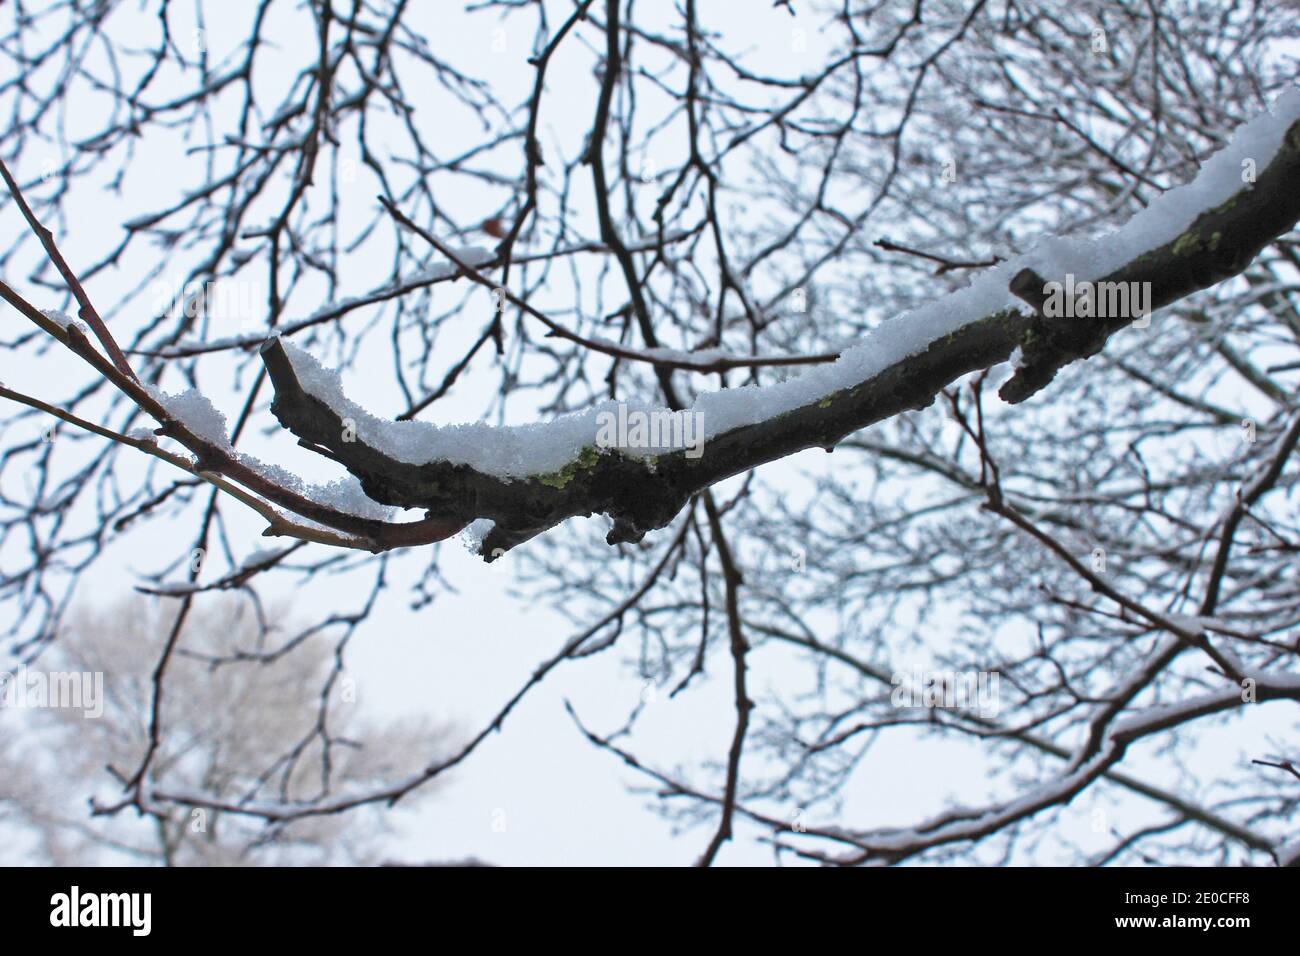 Close up snow on a branch, snow on branches, snow covered branch, snow on tree, in Manchester, England on a snowy winter day Stock Photo